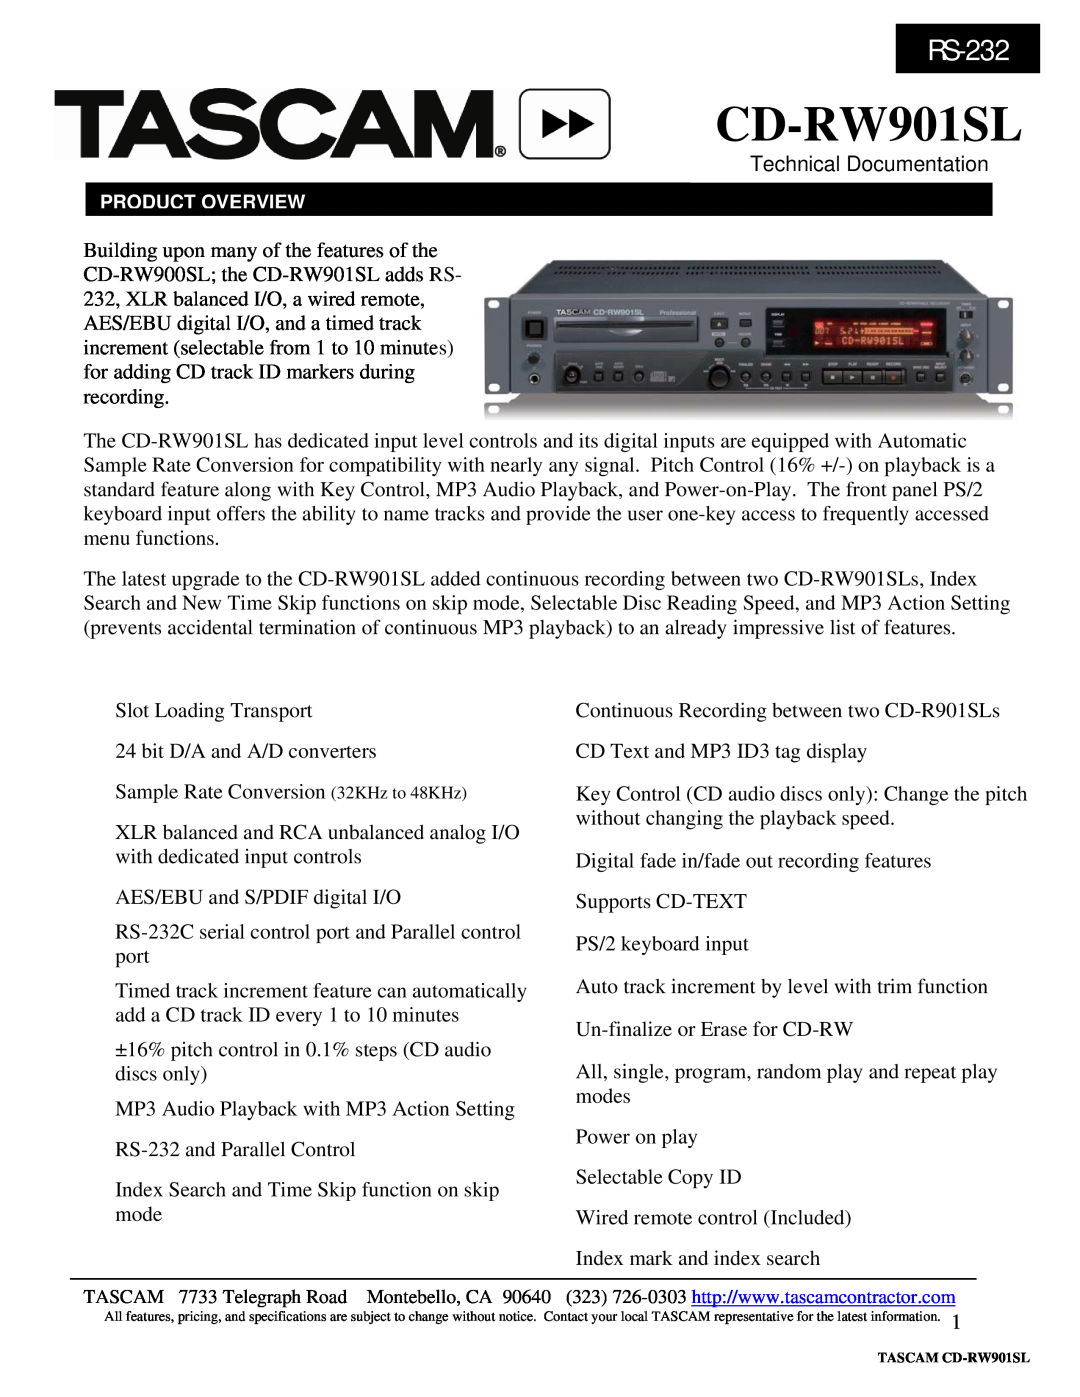 Tascam 6210, 6211 specifications CD-RW901SL, RS-232 